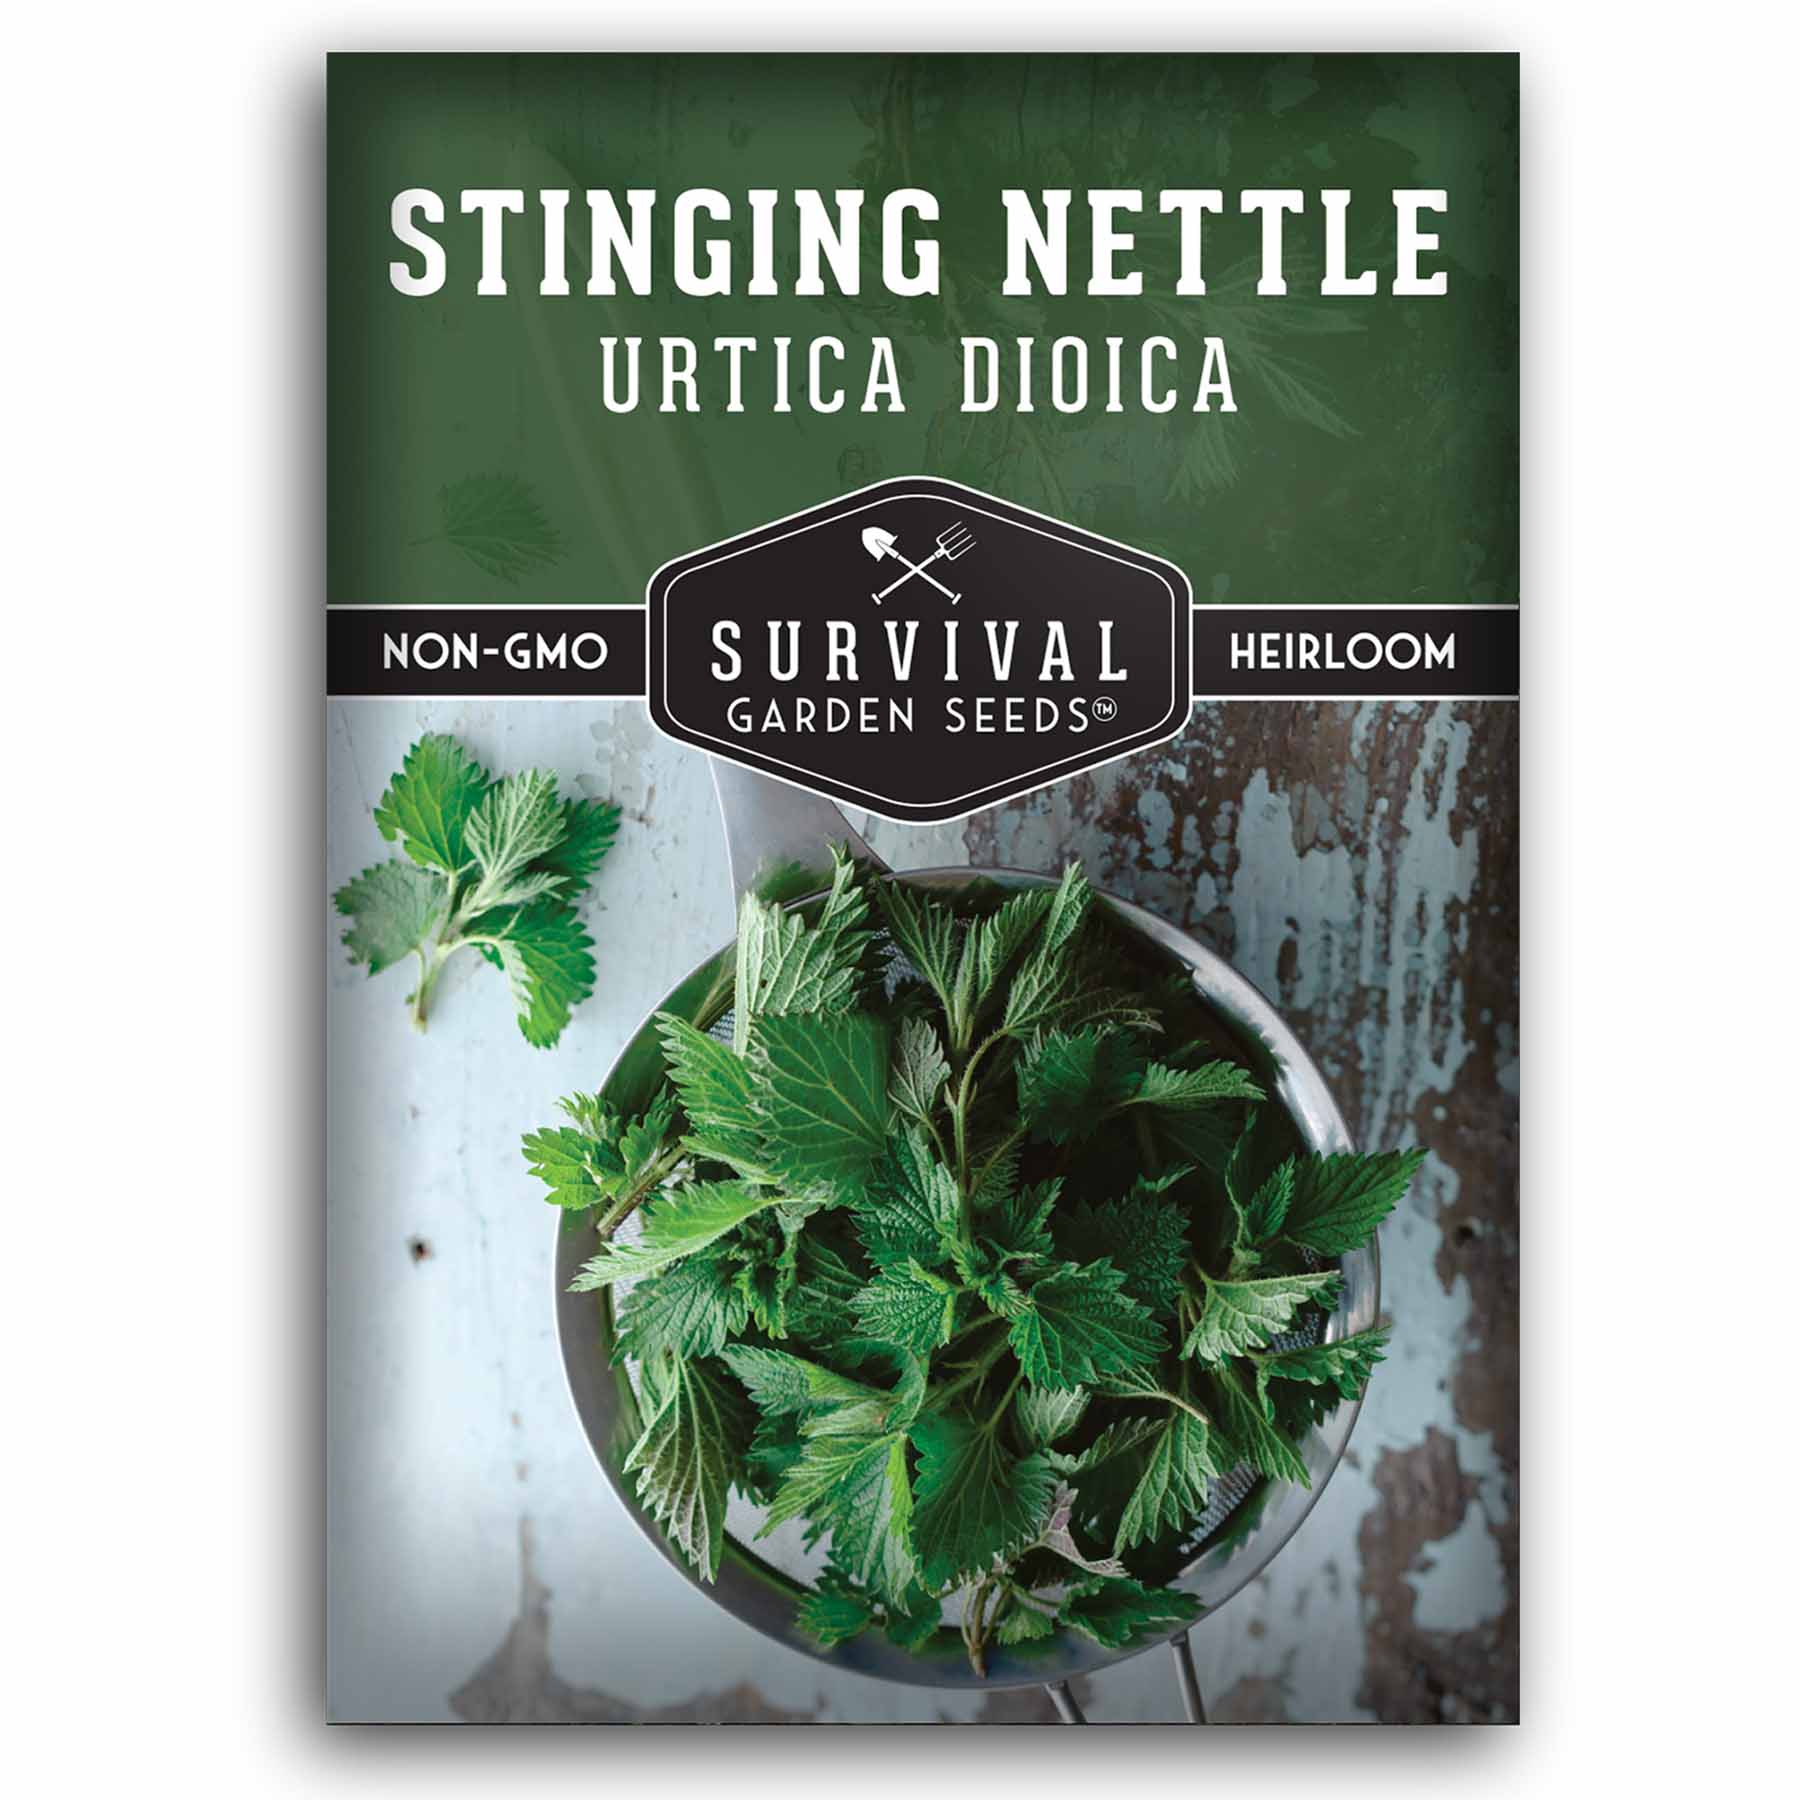 1 packet of Stinging Nettle seeds